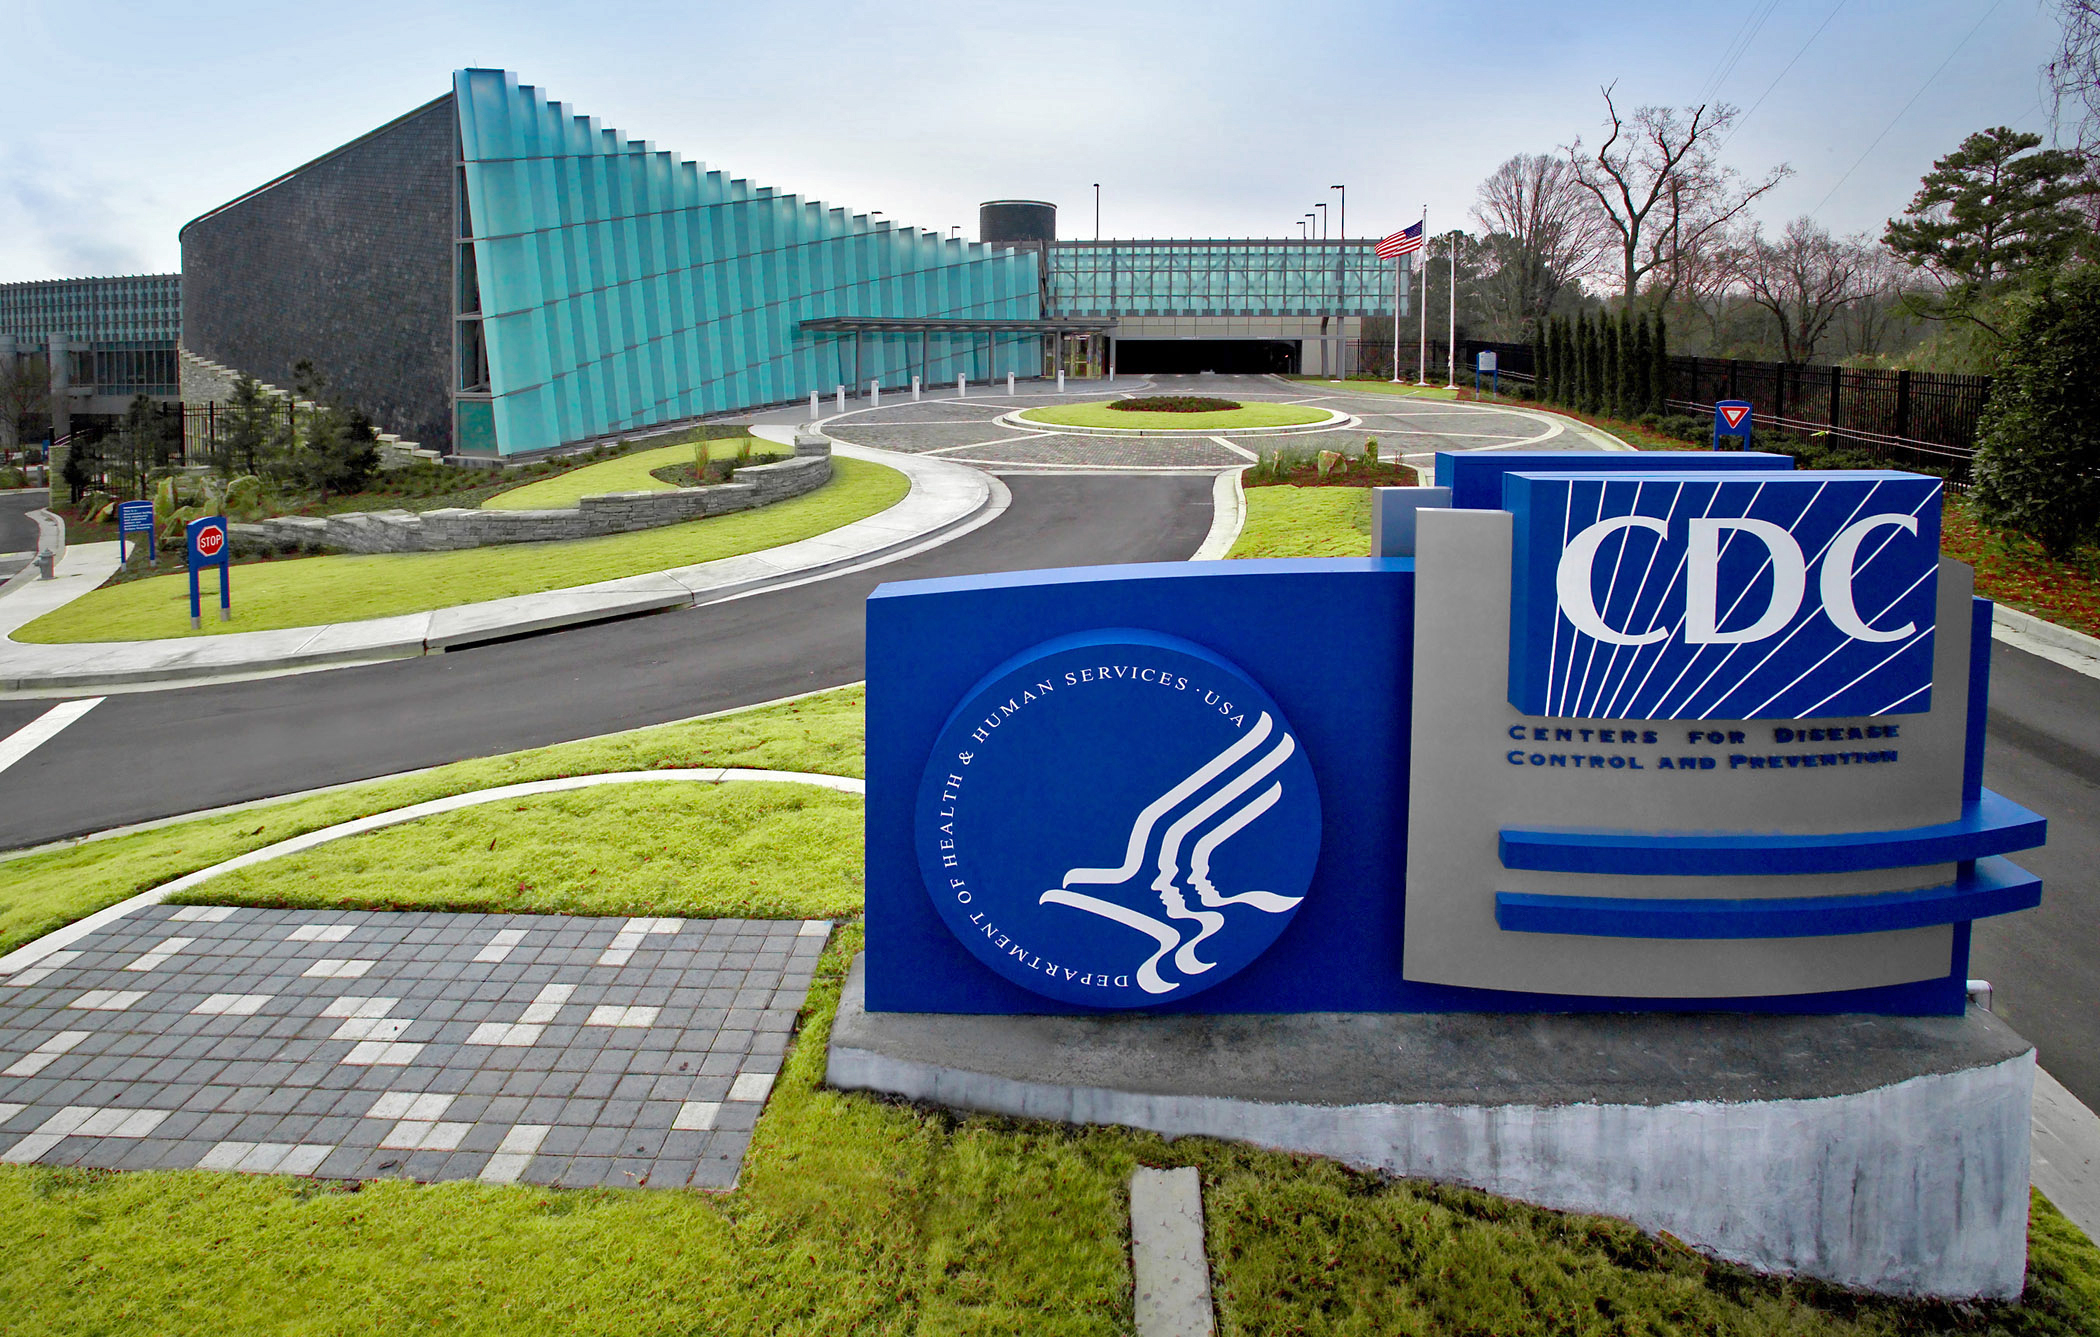 PHOTO: The Centers for Disease Control's Tom Harkin Global Communications Center in Atlanta is shown in a 2006 photo released by the CDC.